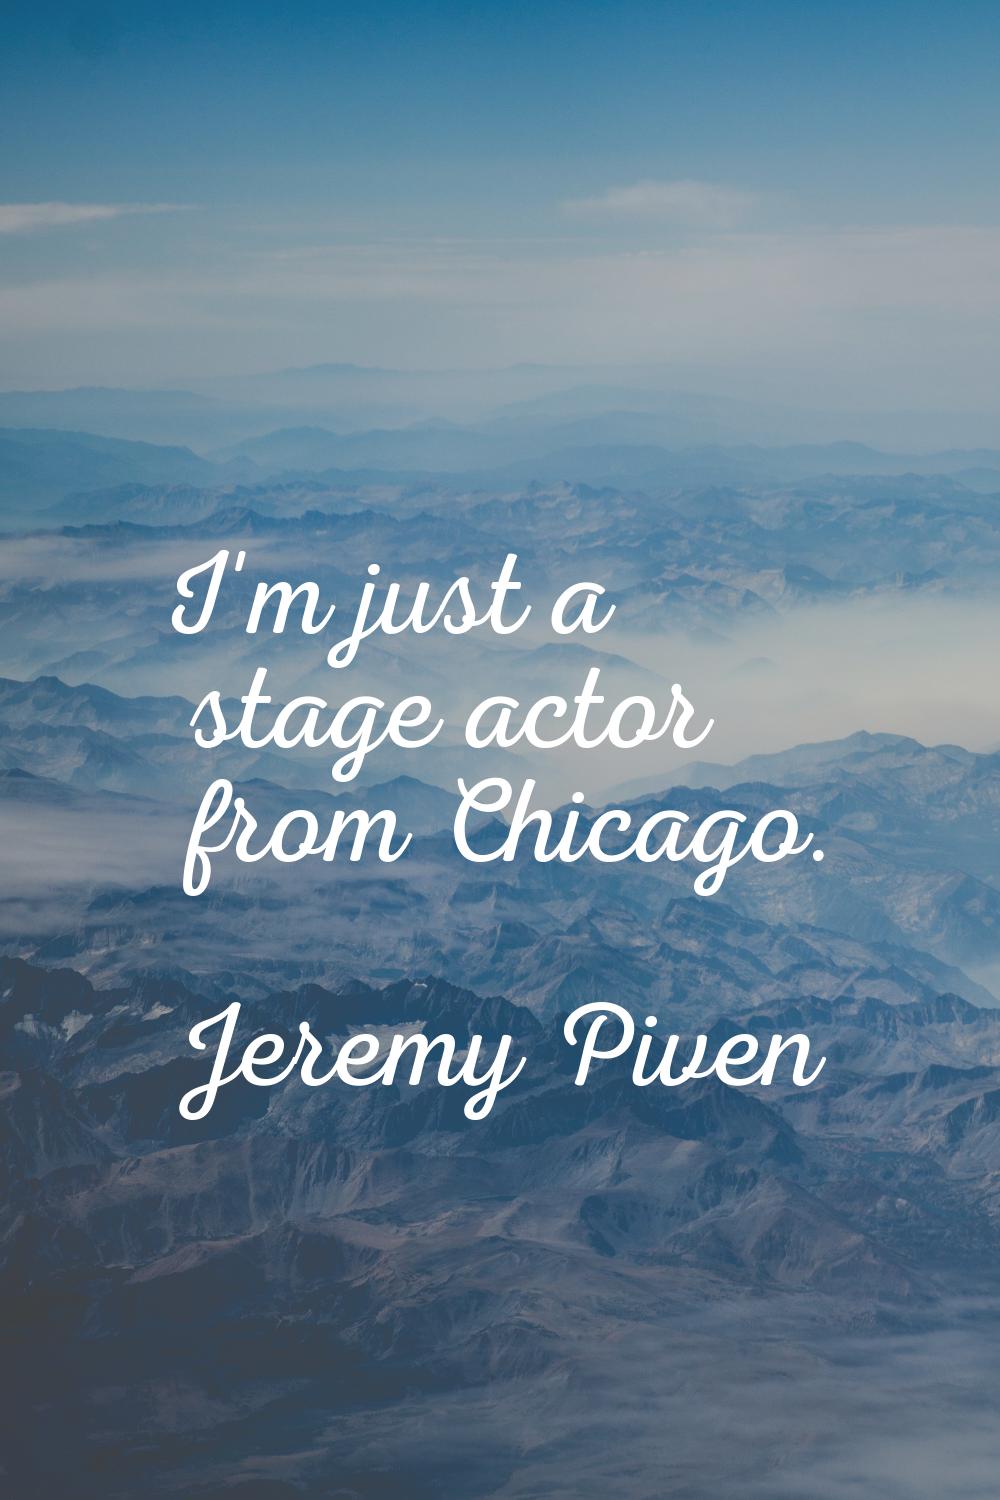 I'm just a stage actor from Chicago.